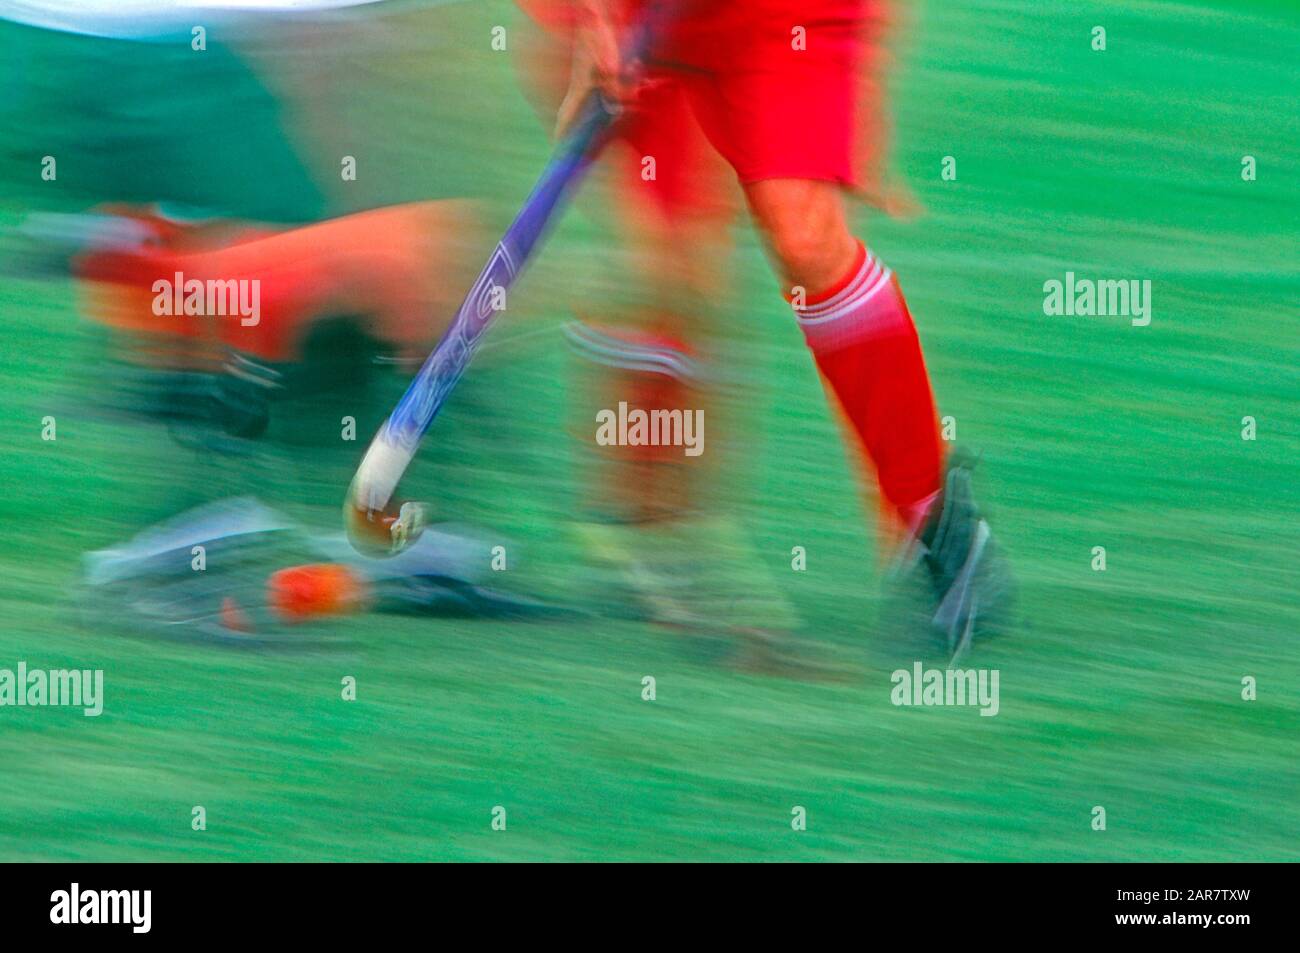 Women's field hockey played on a natural grass field. Blurred motion photograph Stock Photo